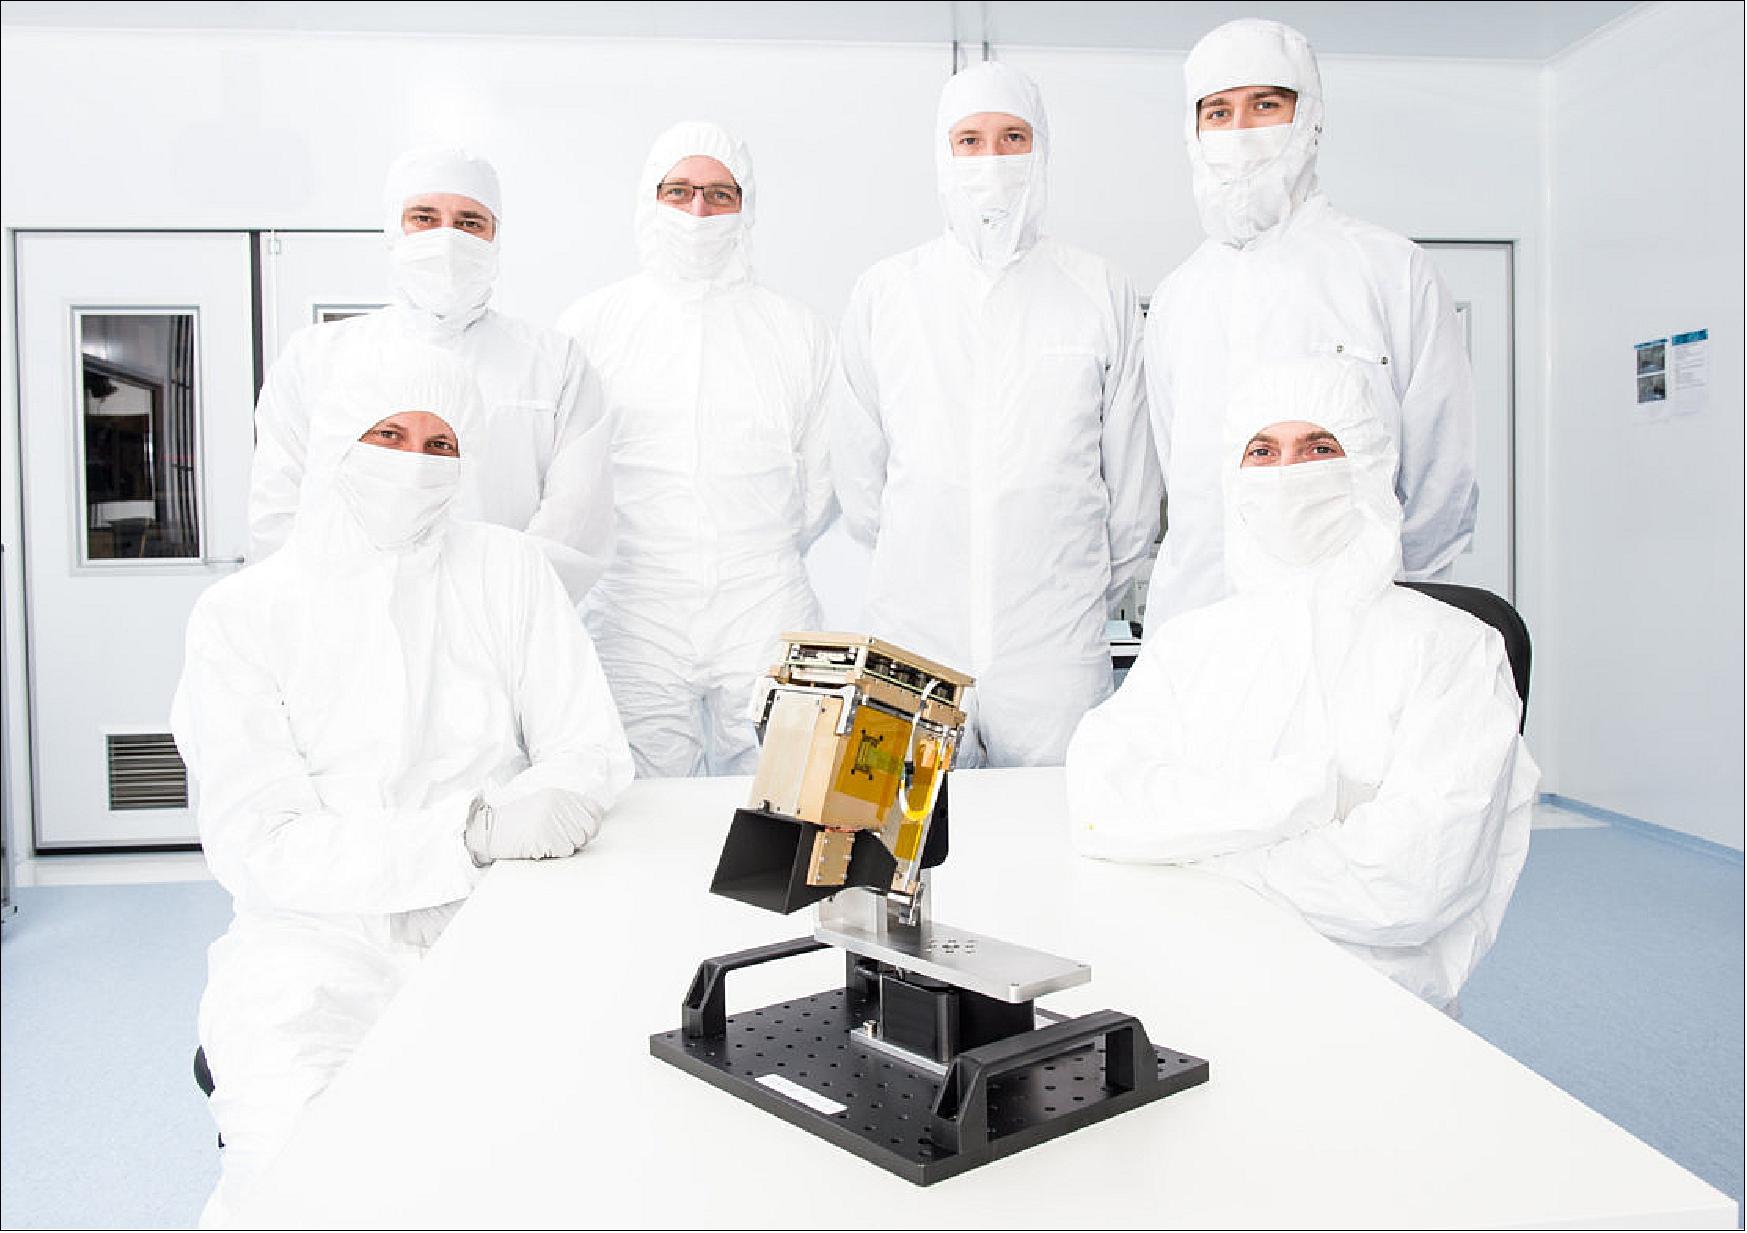 Figure 24: The compact HyperScout hyperspectral imager, small enough to fit aboard CubeSats, was developed by this team from cosine Research in the Netherlands (image credit: cosine Research)